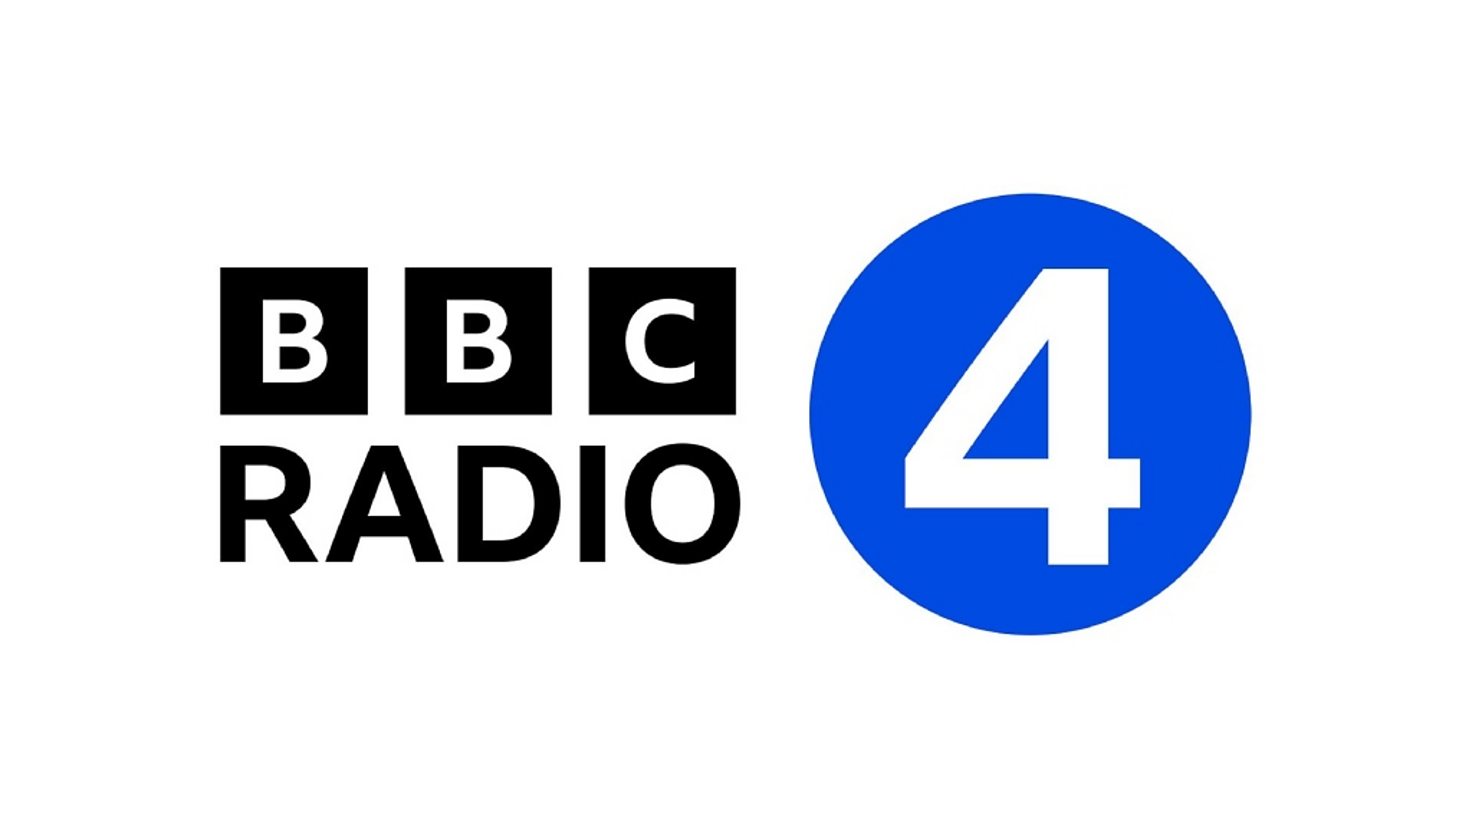 BBC Radio 4 Announces Major Weekend Takeover Of Schedule By Two Literary Giants